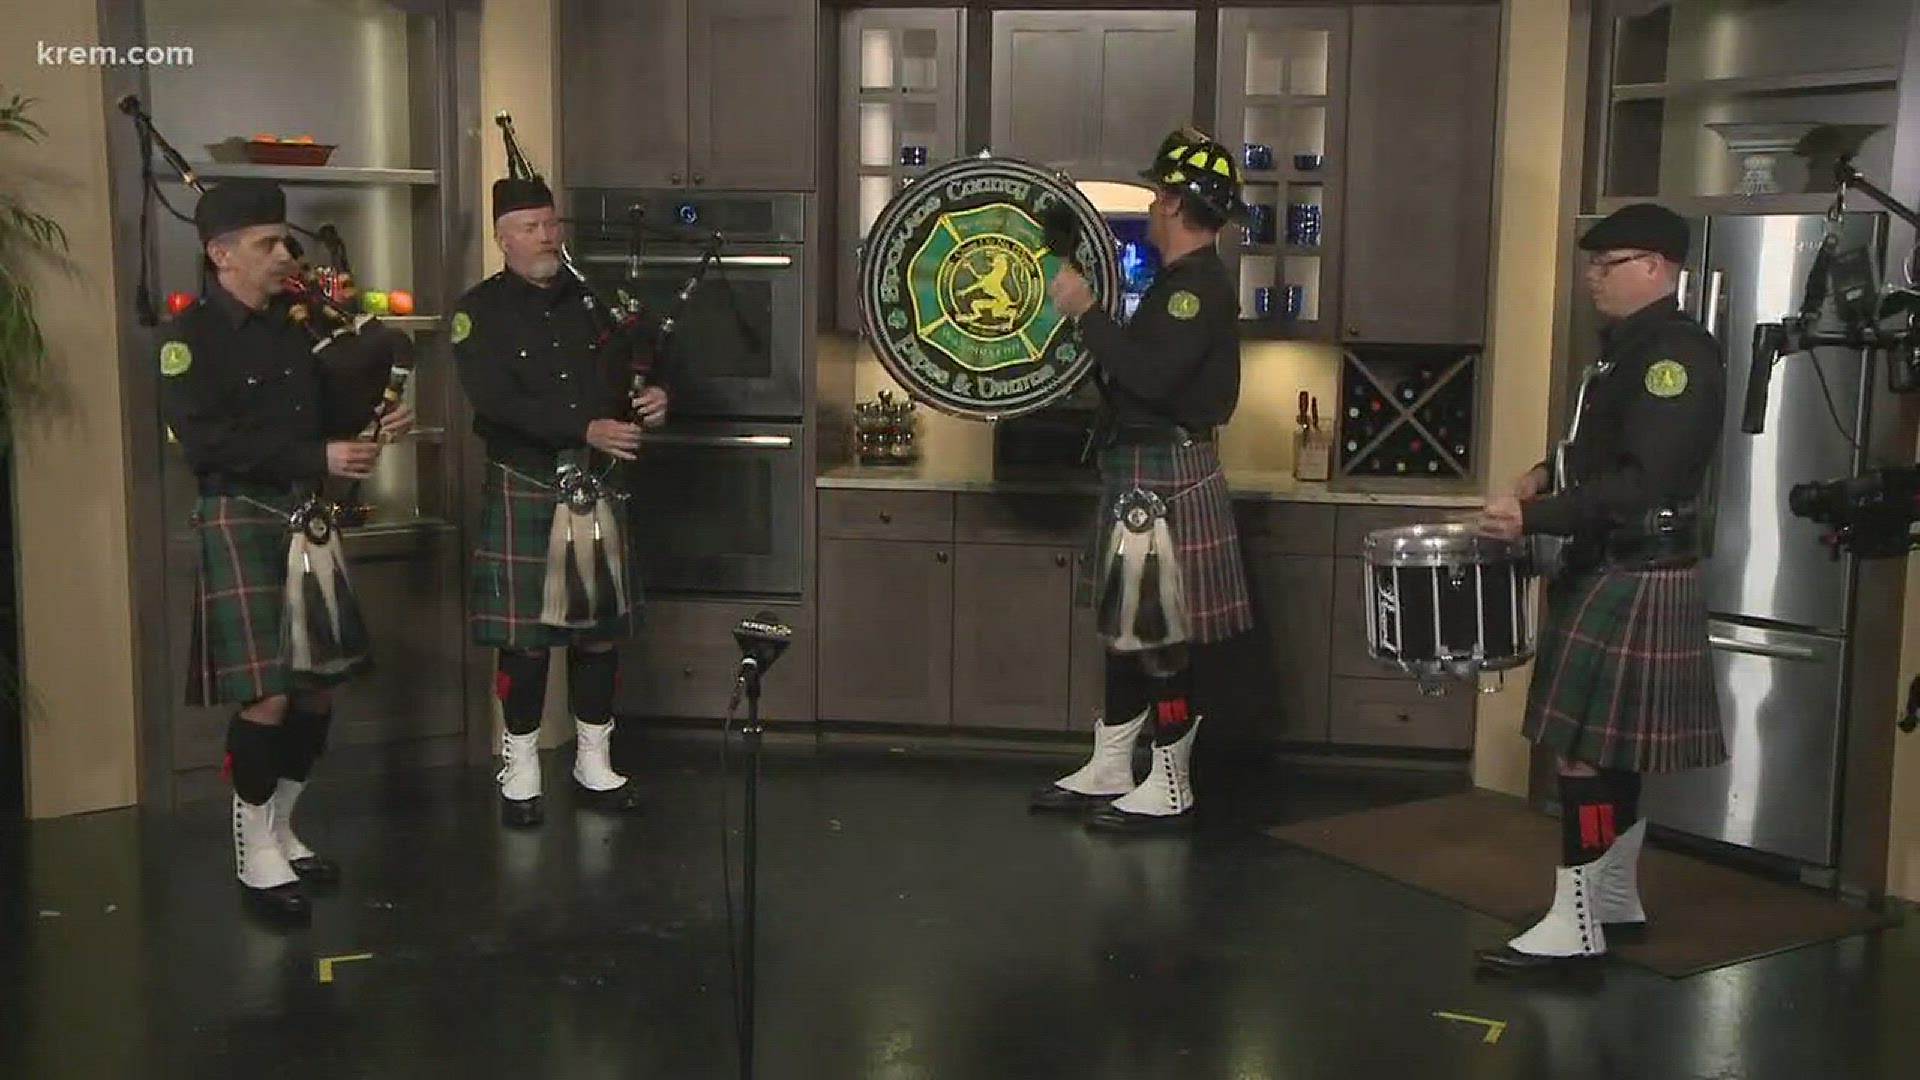 Spokane Co. Firefighters pipes and drums celebrate St. Paddy'a Day! (2-16-18)